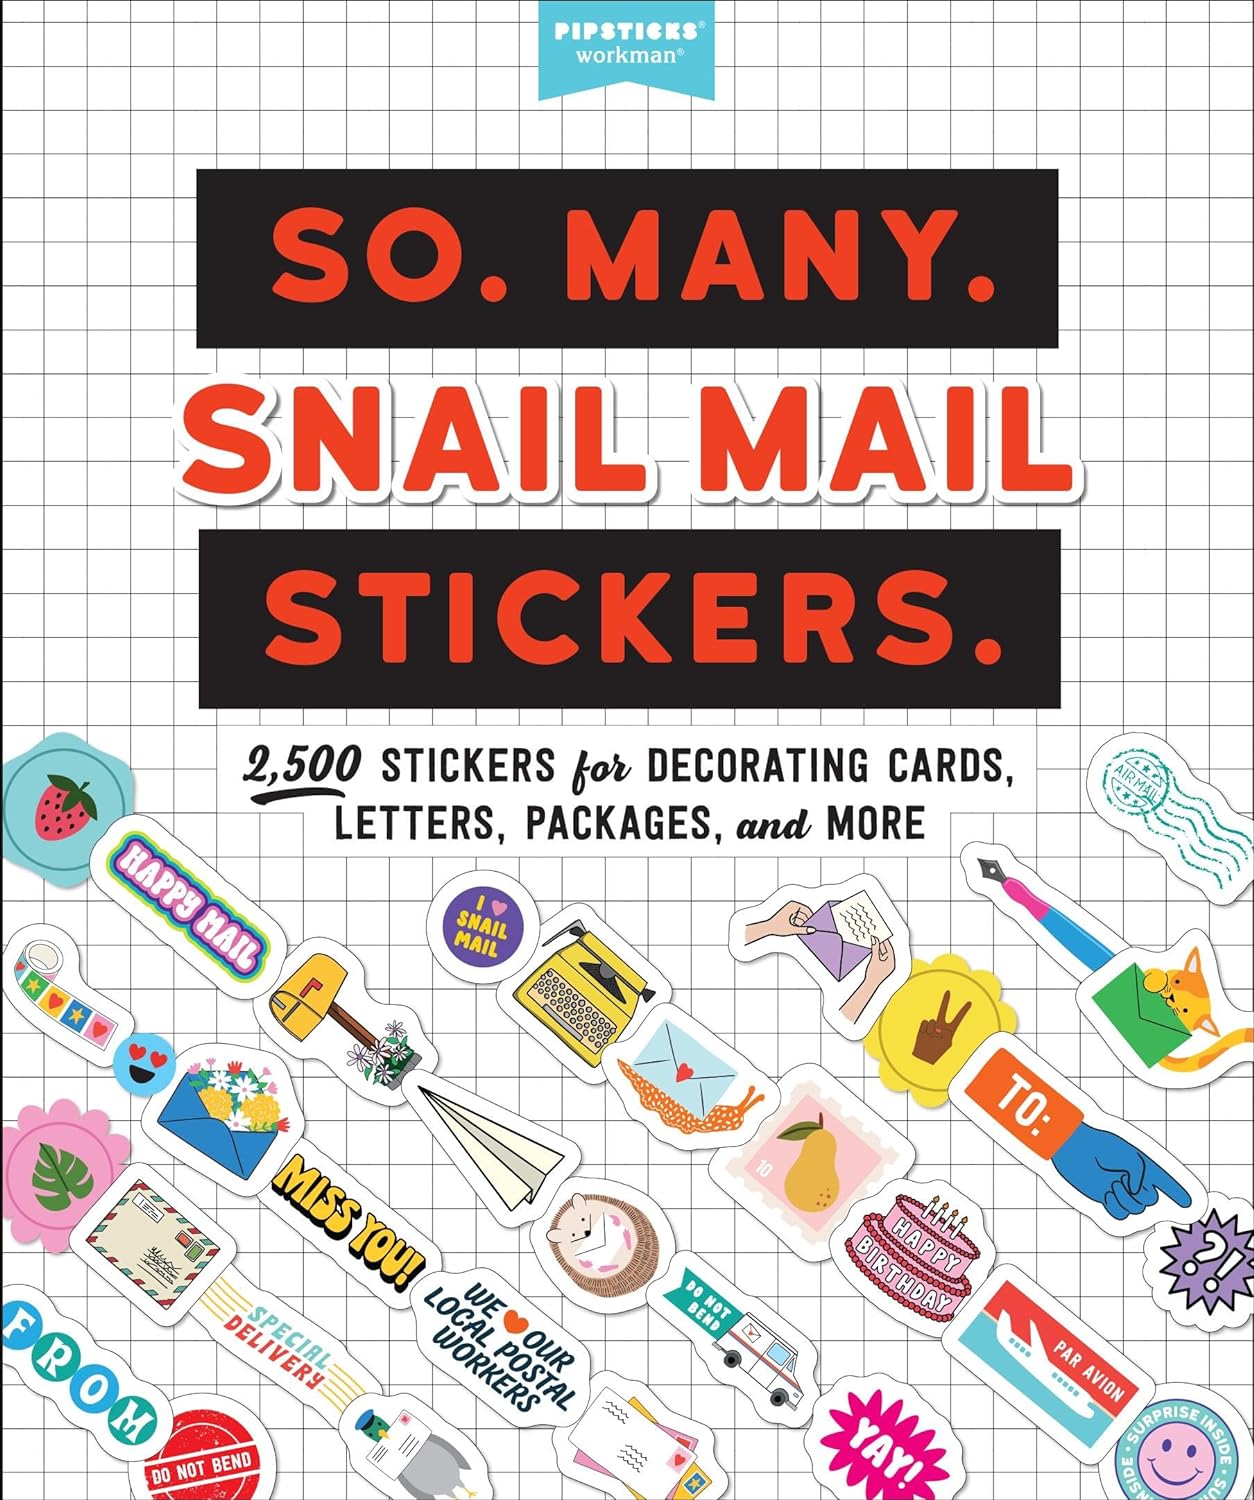 So. Many. Snail Mail Stickers.: 2,500 Stickers for Decorating Cards, Letters, Packages, and More